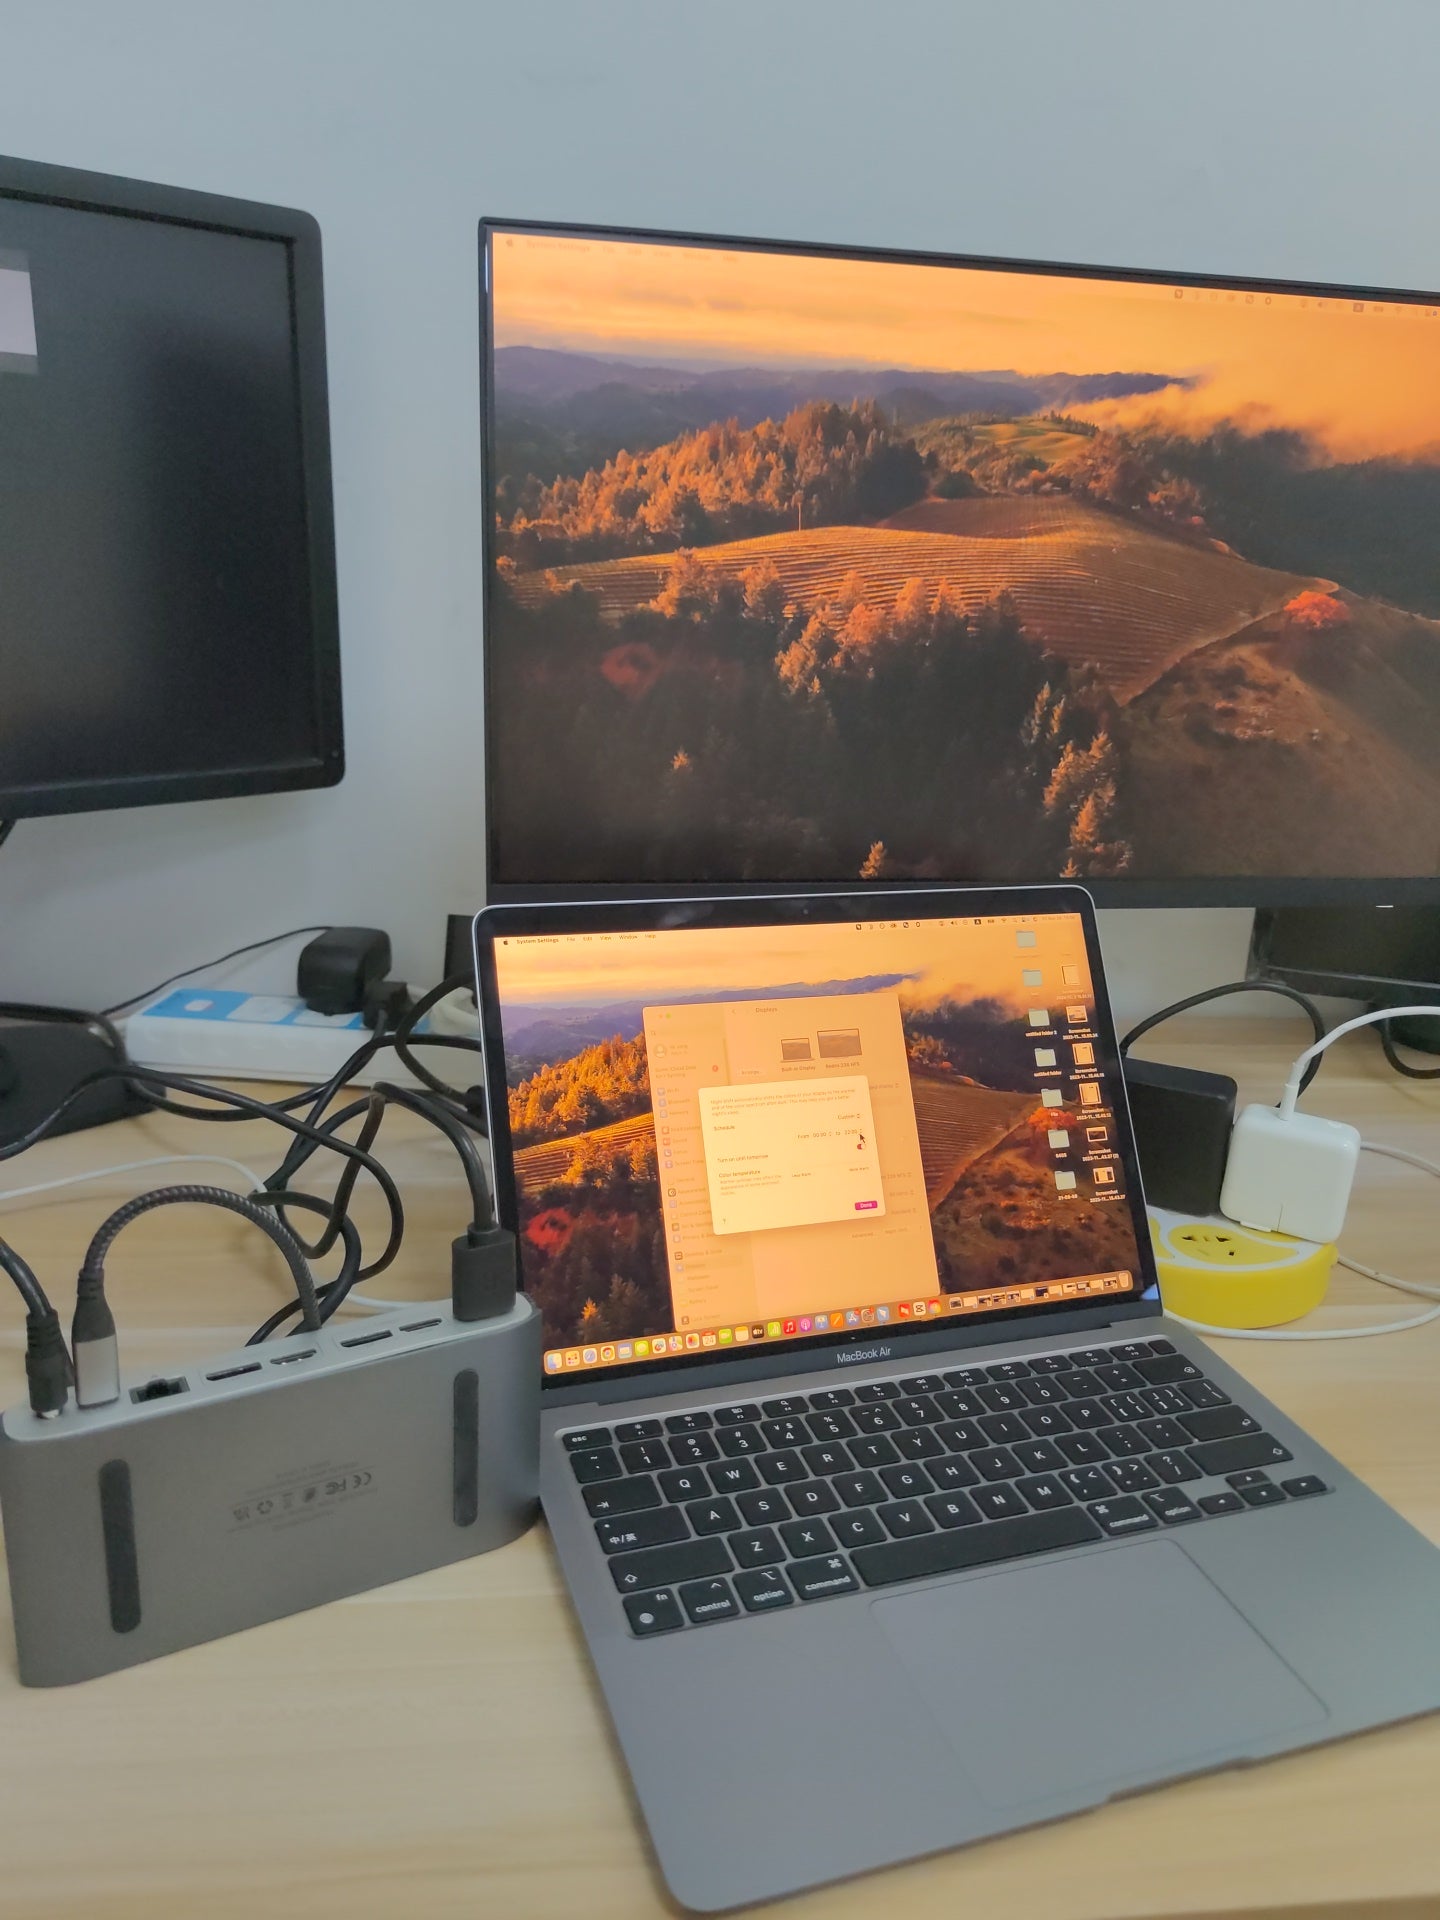 When I use the Minisopuru 15 in 1 DisplayLink Docking Station (model MD6950D), how do I make the external screen to warm color (adjusted to Night Shift) on MacOS?